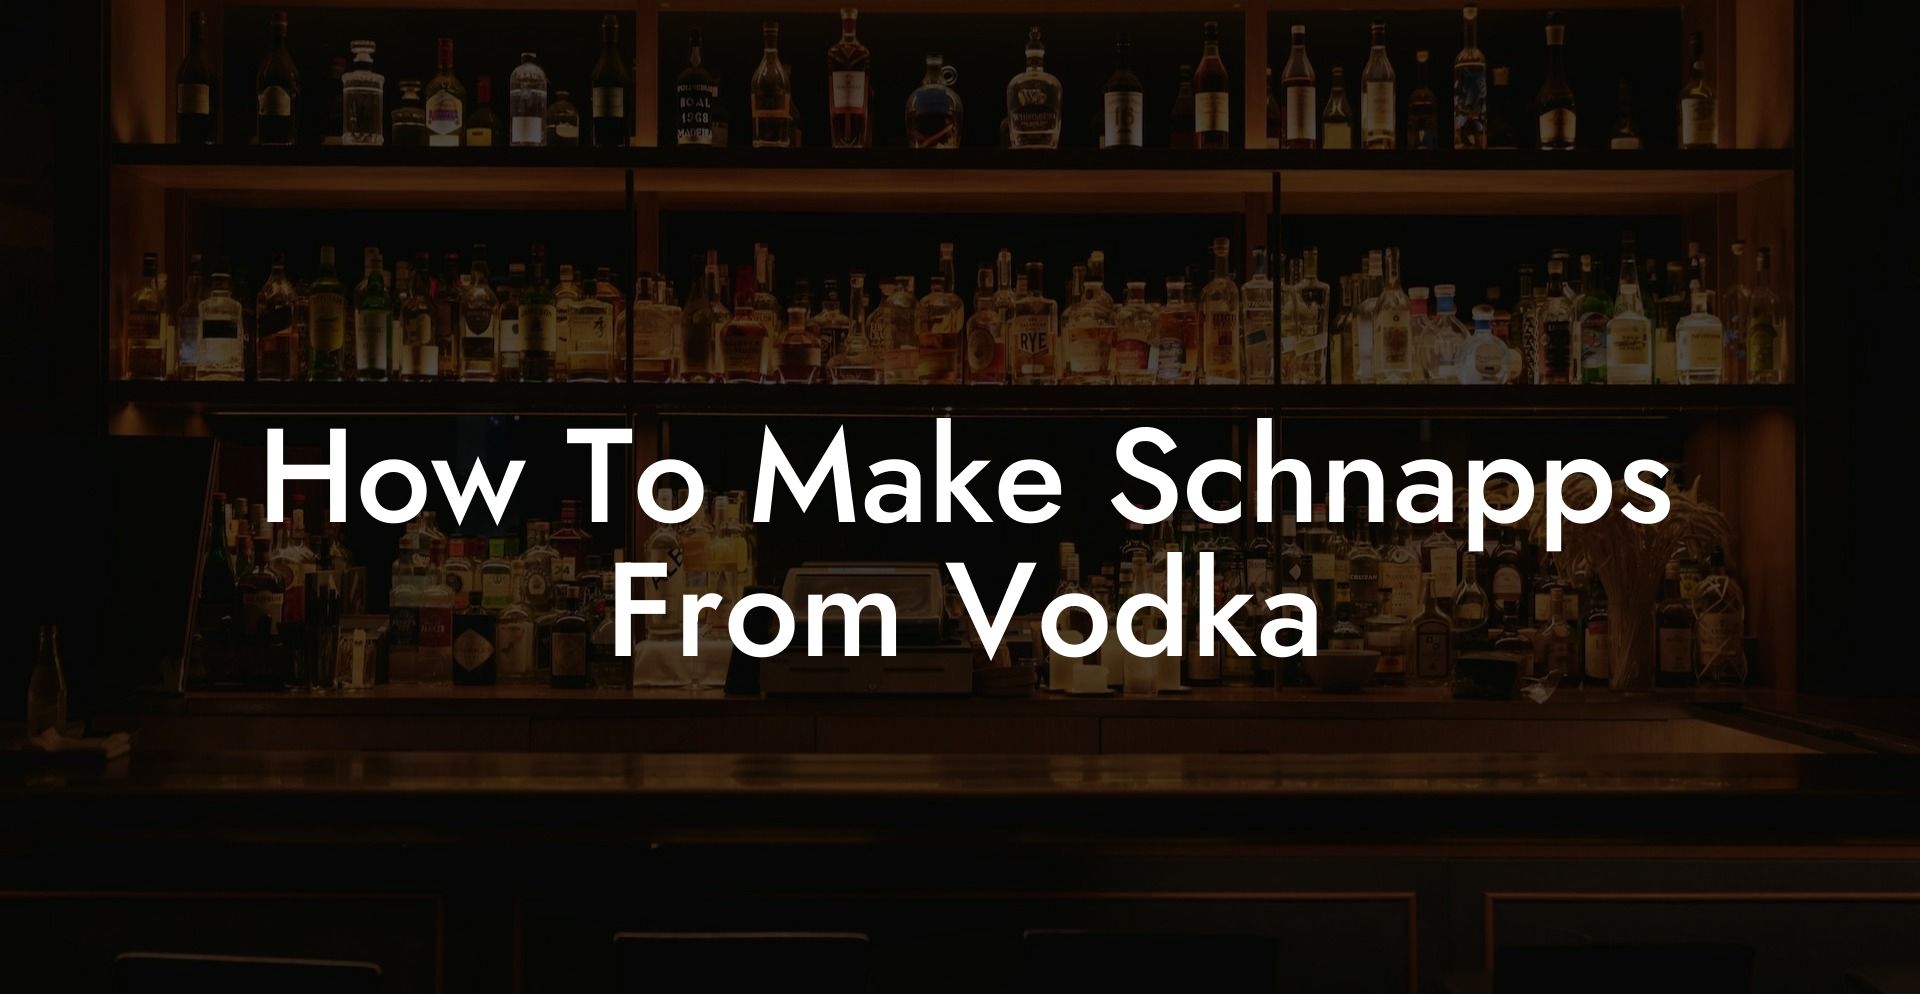 How To Make Schnapps From Vodka